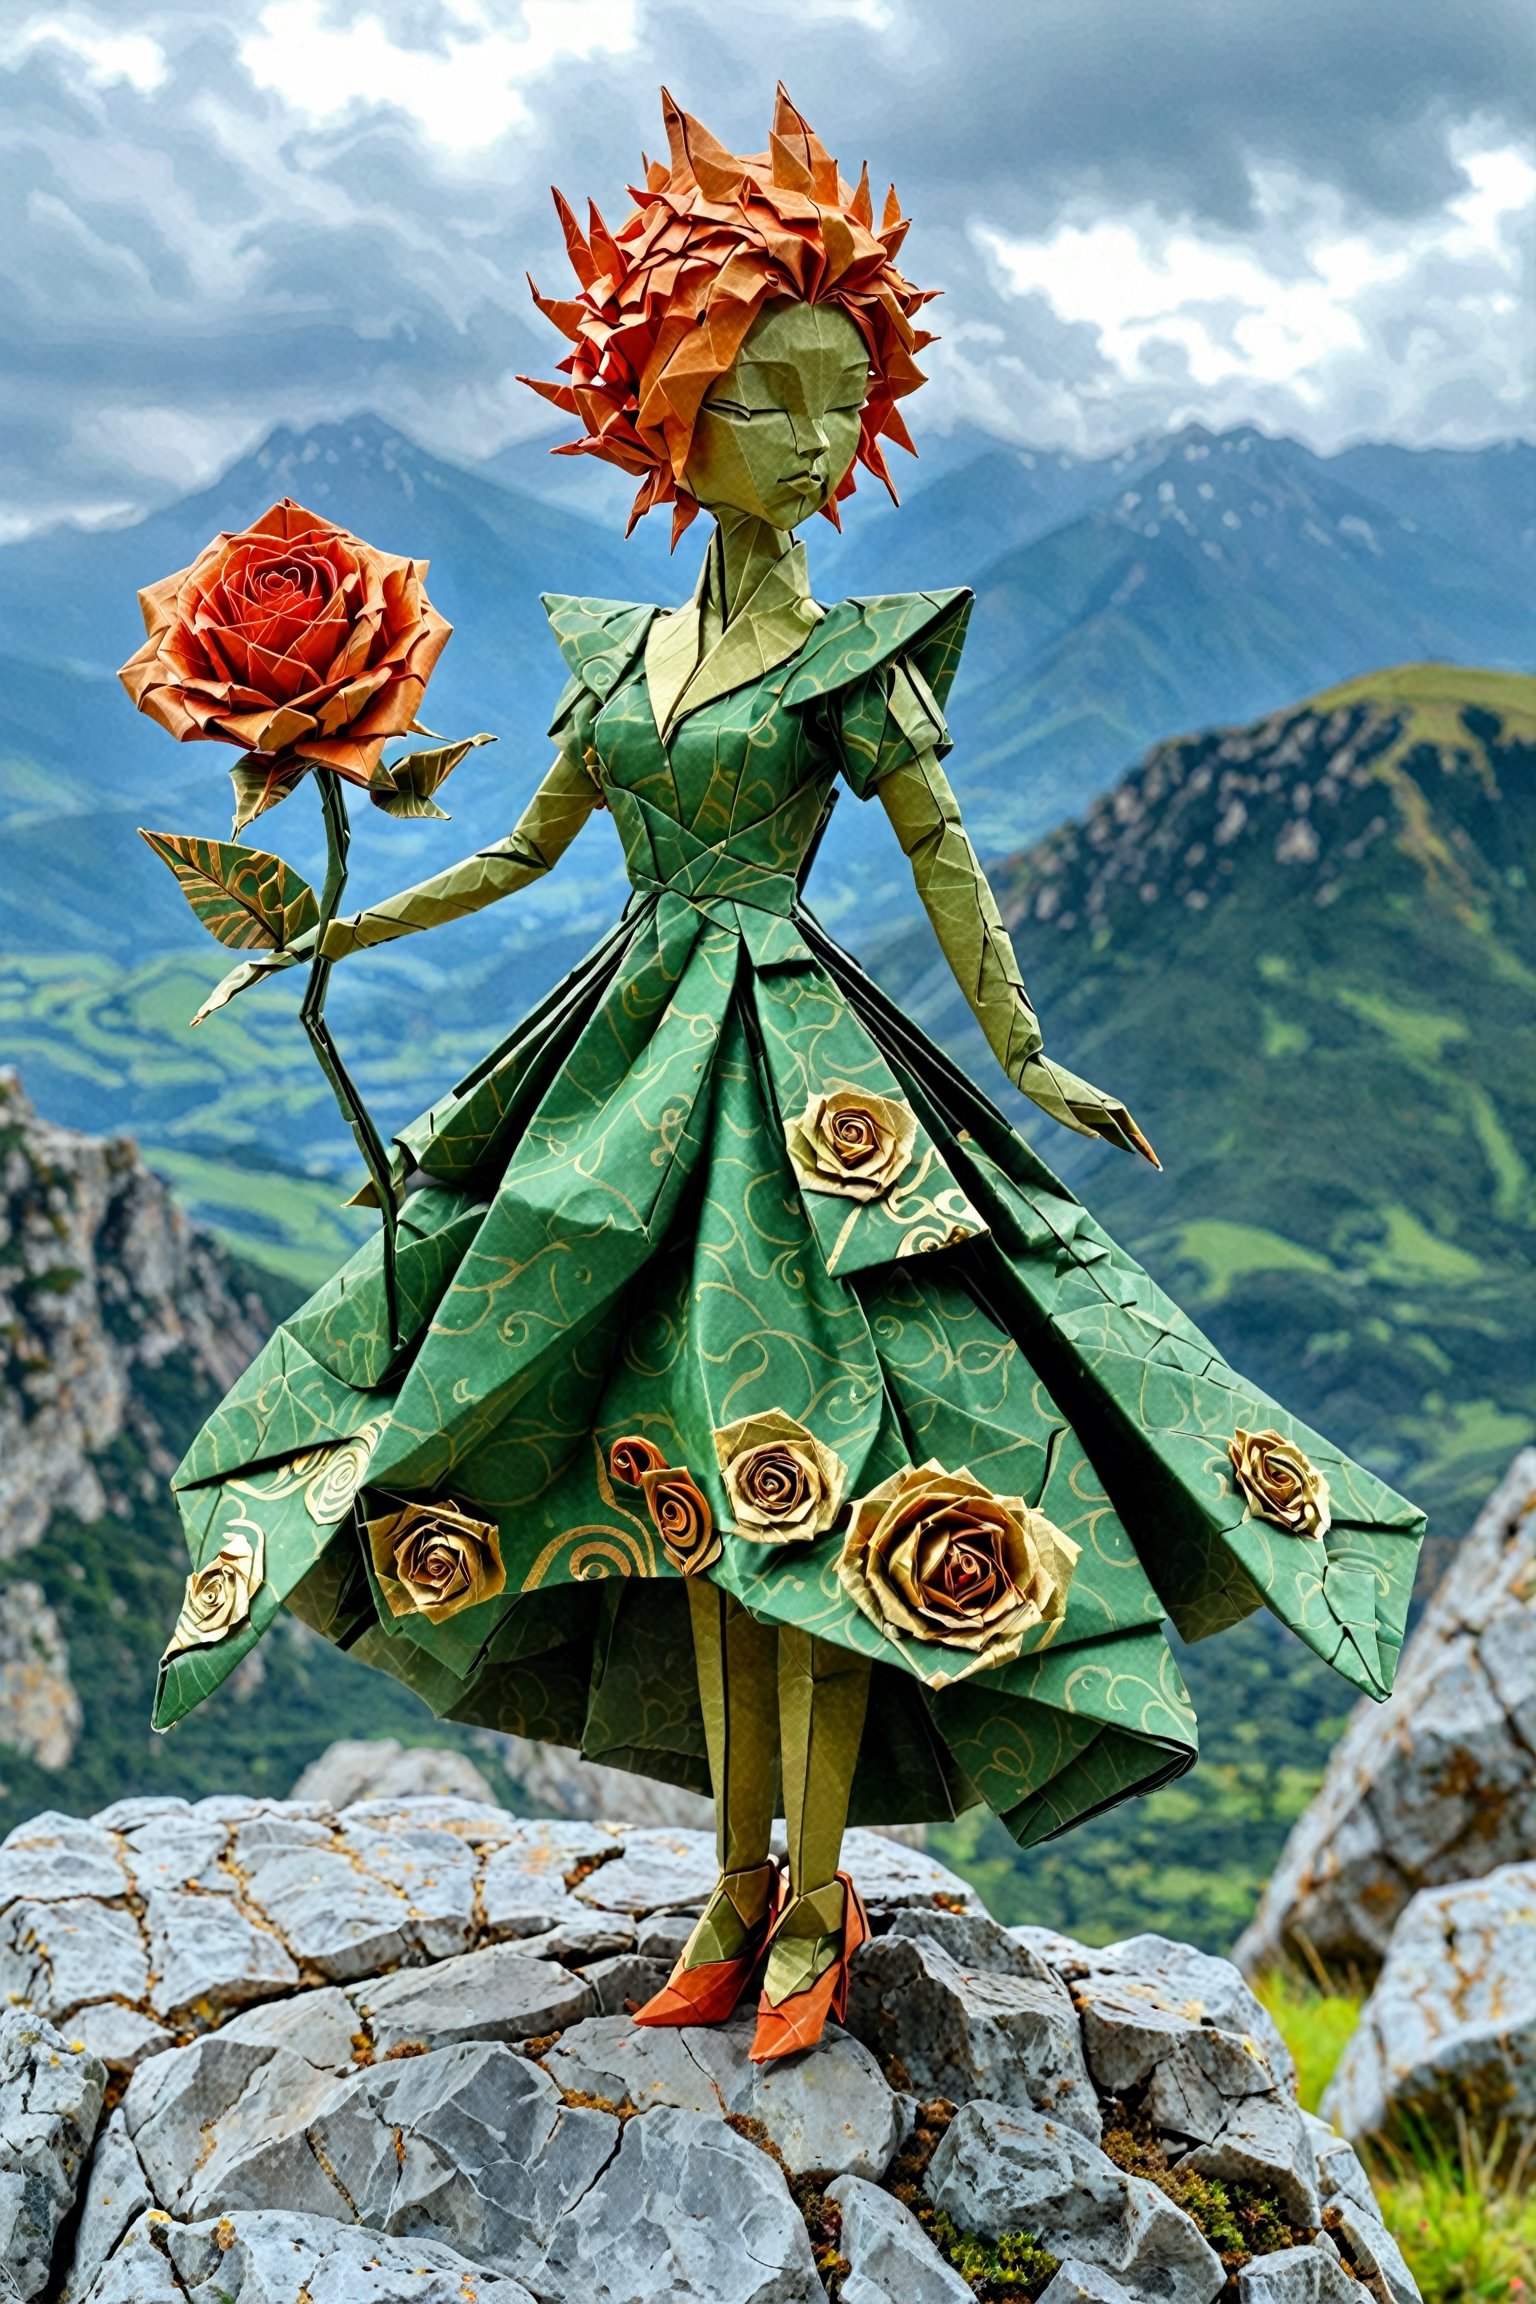 An intricately crafted origami figure, possibly inspired by a mythical or fantasy character. The figure has a green dress adorned with golden swirls, and a distinctive orange, spiky hairdo. It holds a beautifully crafted red rose in one hand. The origami figure stands atop a rugged rock, with a vast and scenic landscape stretching out behind it. The sky above is filled with clouds, hinting at a possible change in weather.